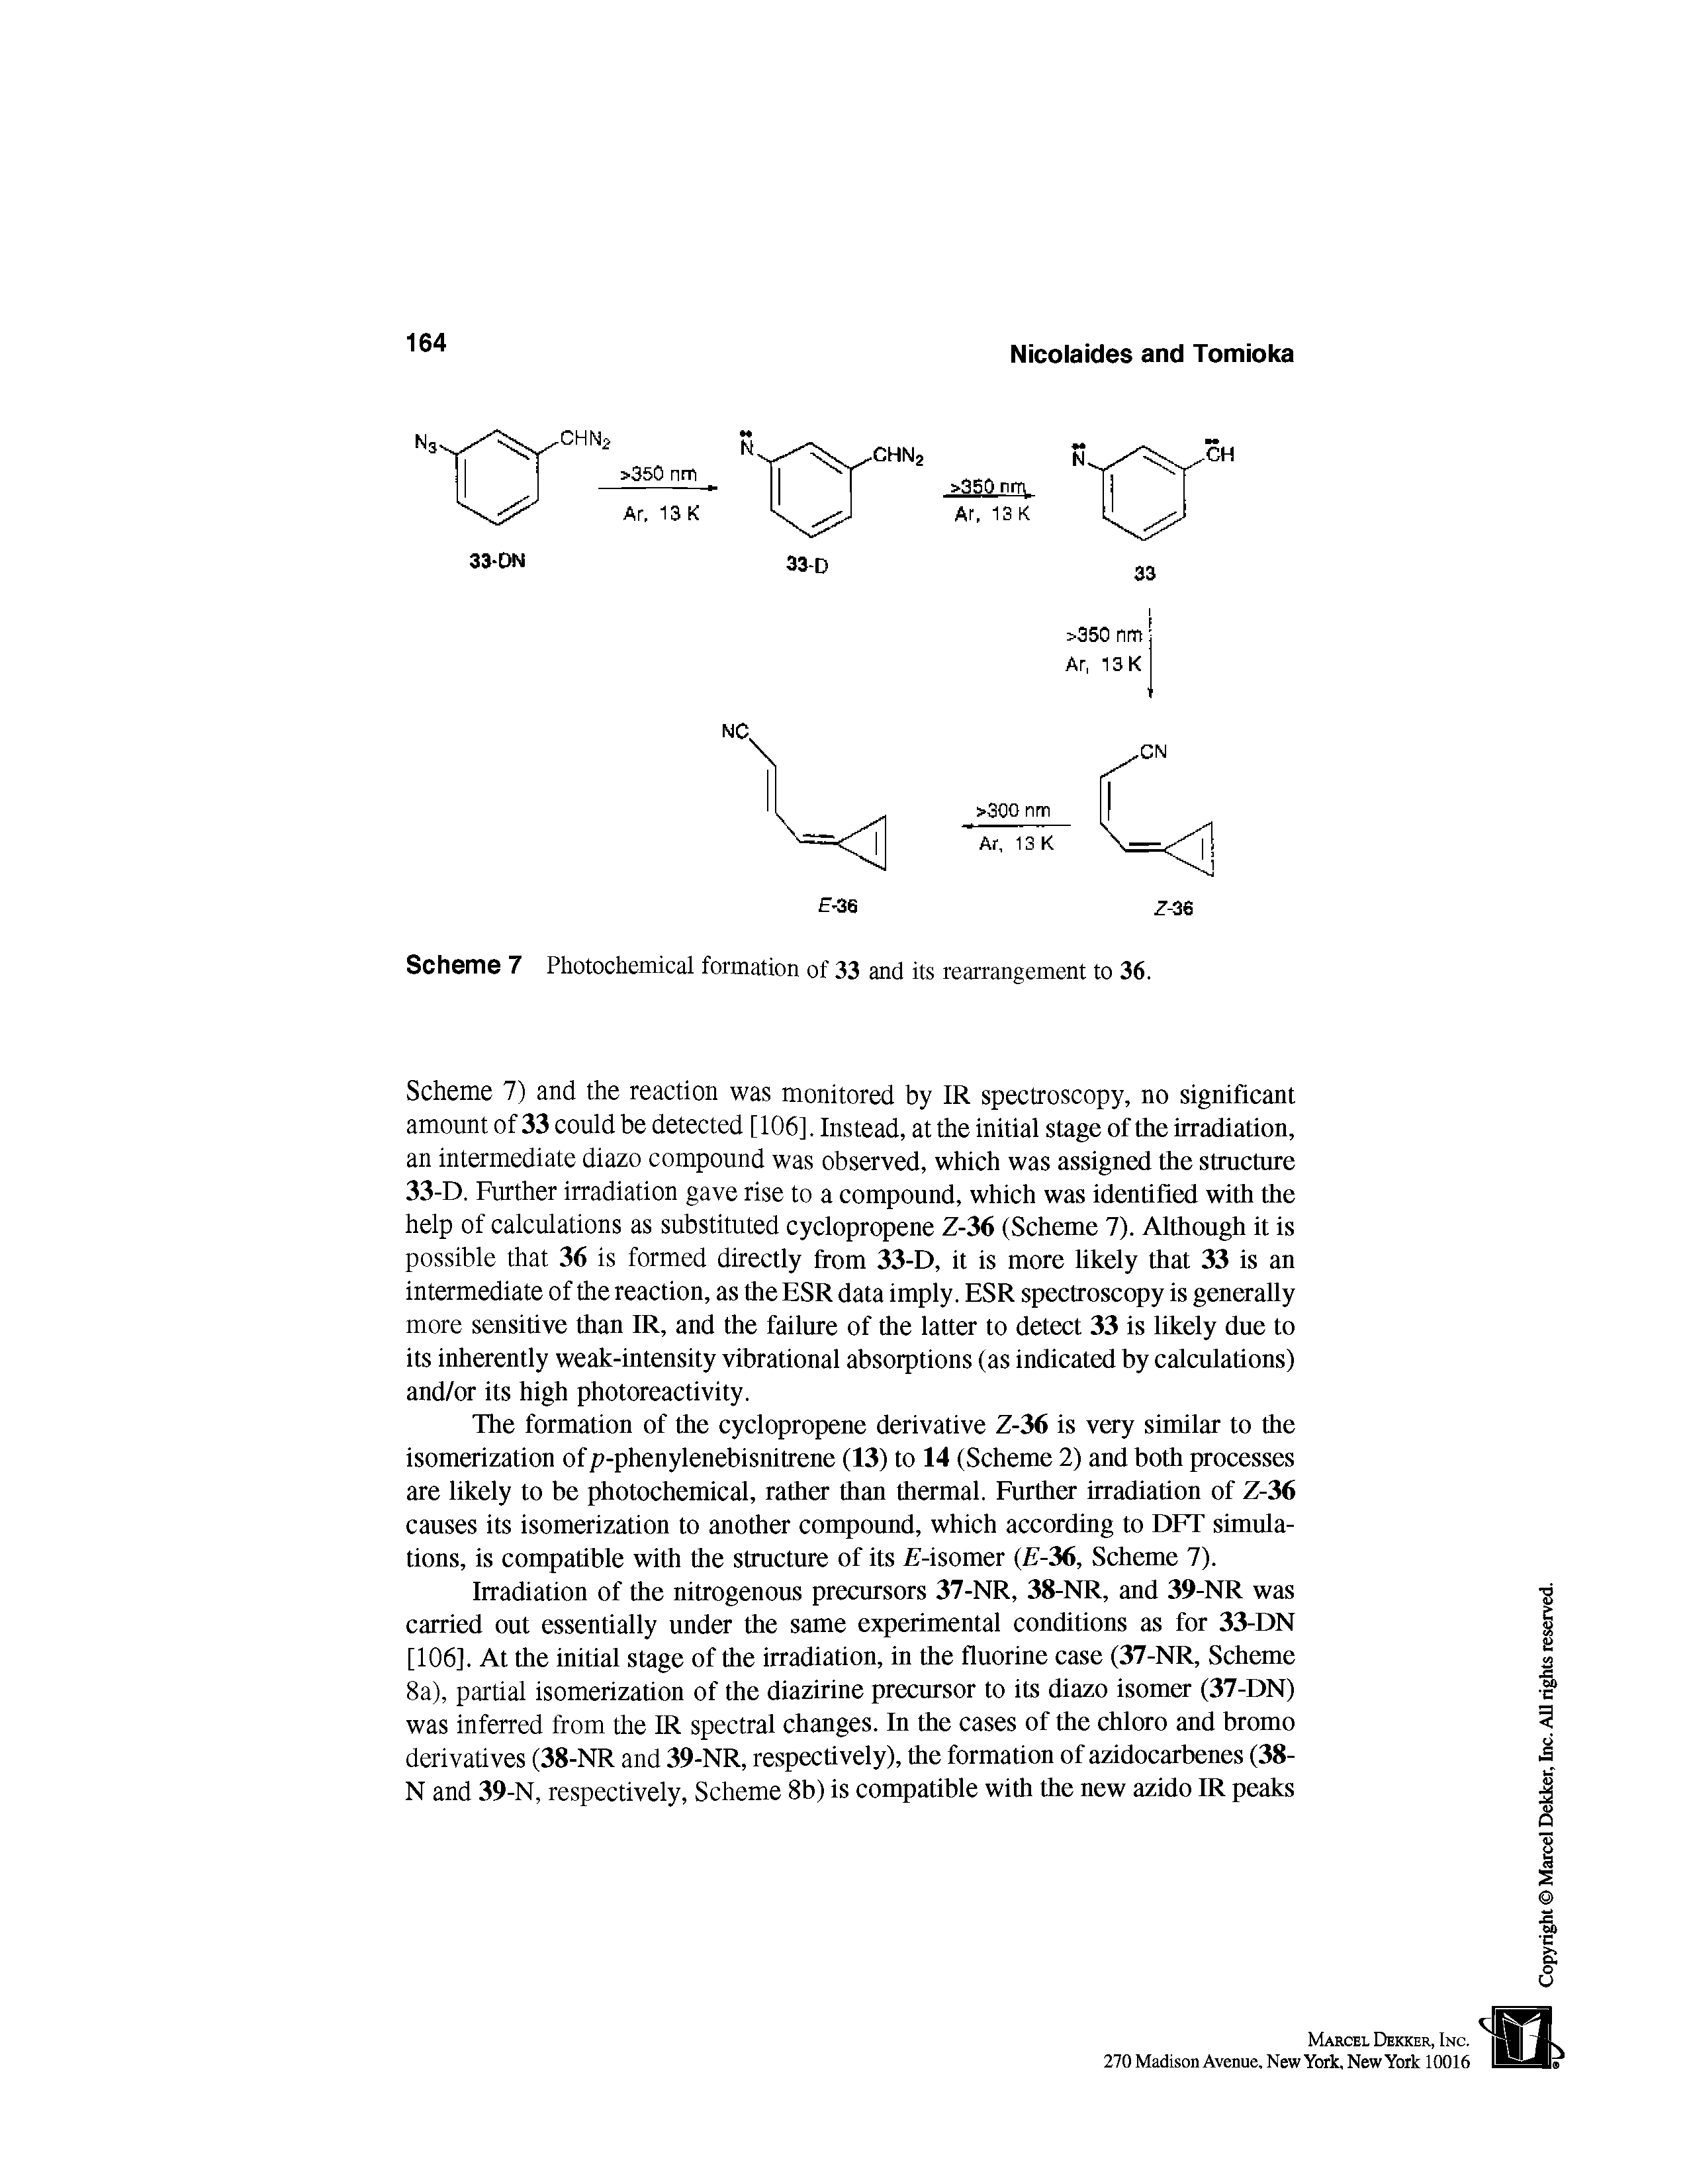 Scheme 7) and the reaction was monitored by IR spectroscopy, no significant amount of 33 could be detected [106], Instead, at the initial stage of the irradiation, an intermediate diazo compound was observed, which was assigned the structure 33-D. Further irradiation gave rise to a compound, which was identified with the help of calculations as substituted cyclopropene Z-36 (Scheme 7). Although it is possible that 36 is formed directly from 33-D, it is more likely that 33 is an intermediate of the reaction, as the ESR data imply. ESR spectroscopy is generally more sensitive than IR, and the failure of the latter to detect 33 is likely due to its inherently weak-intensity vibrational absorptions (as indicated by calculations) and/or its high photoreactivity.